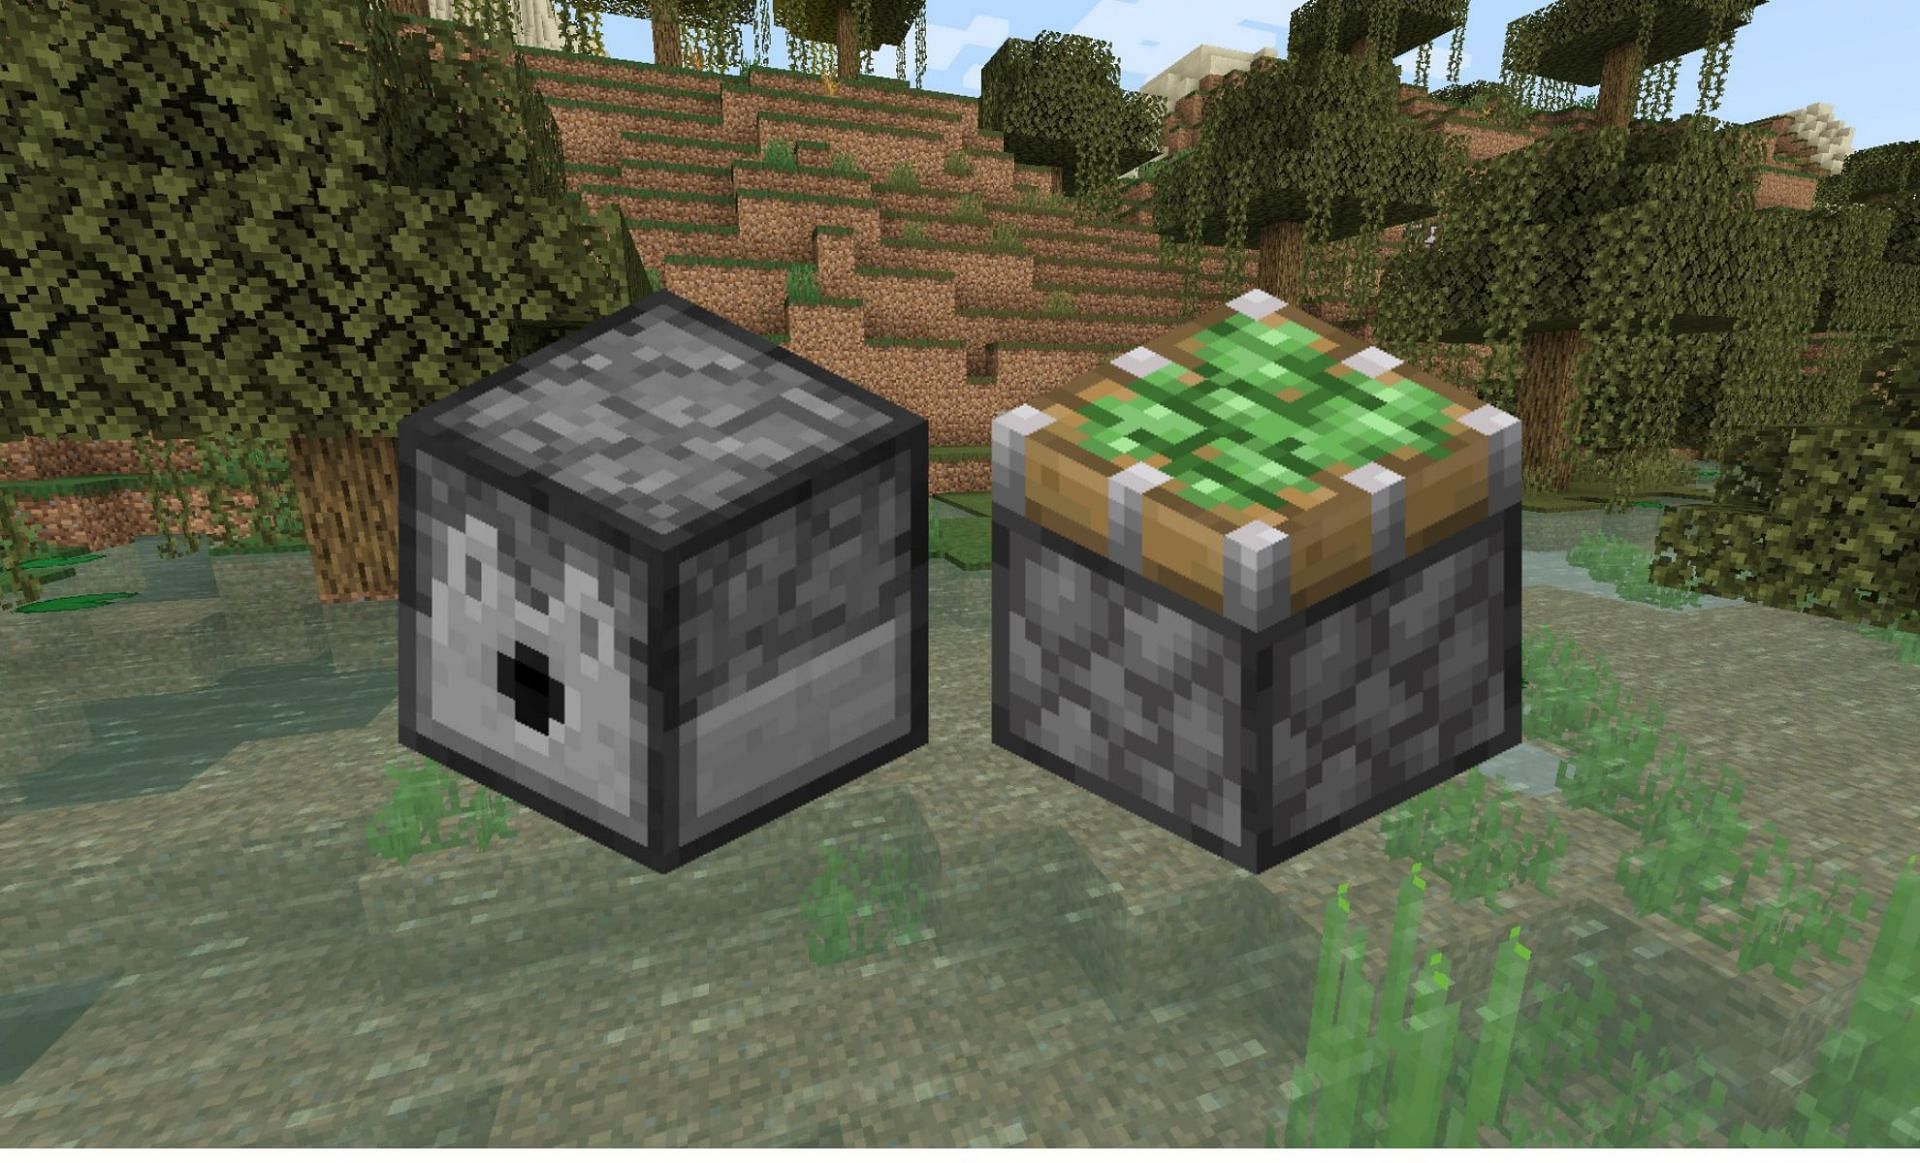 A piston and dispenser (Images via Minecraft Wiki)